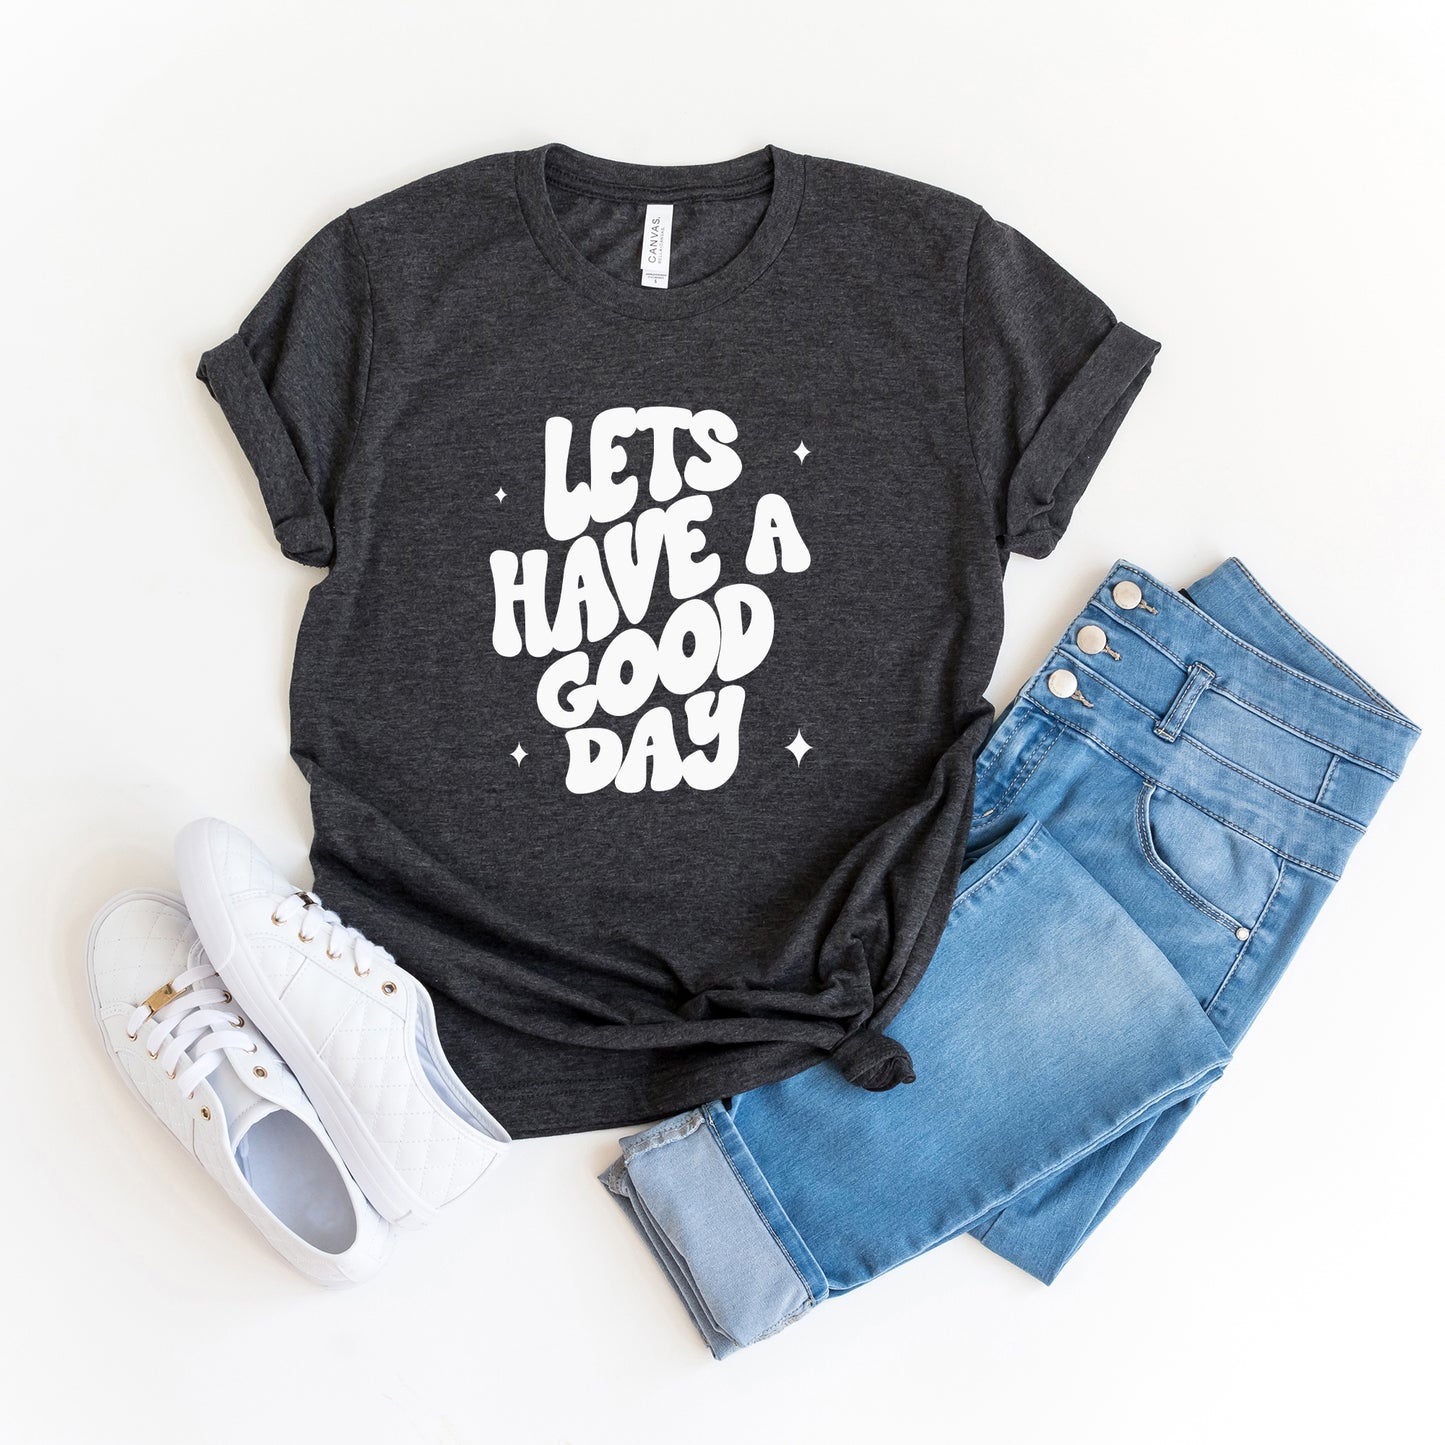 Let's Have A Good Day | Short Sleeve Graphic Tee